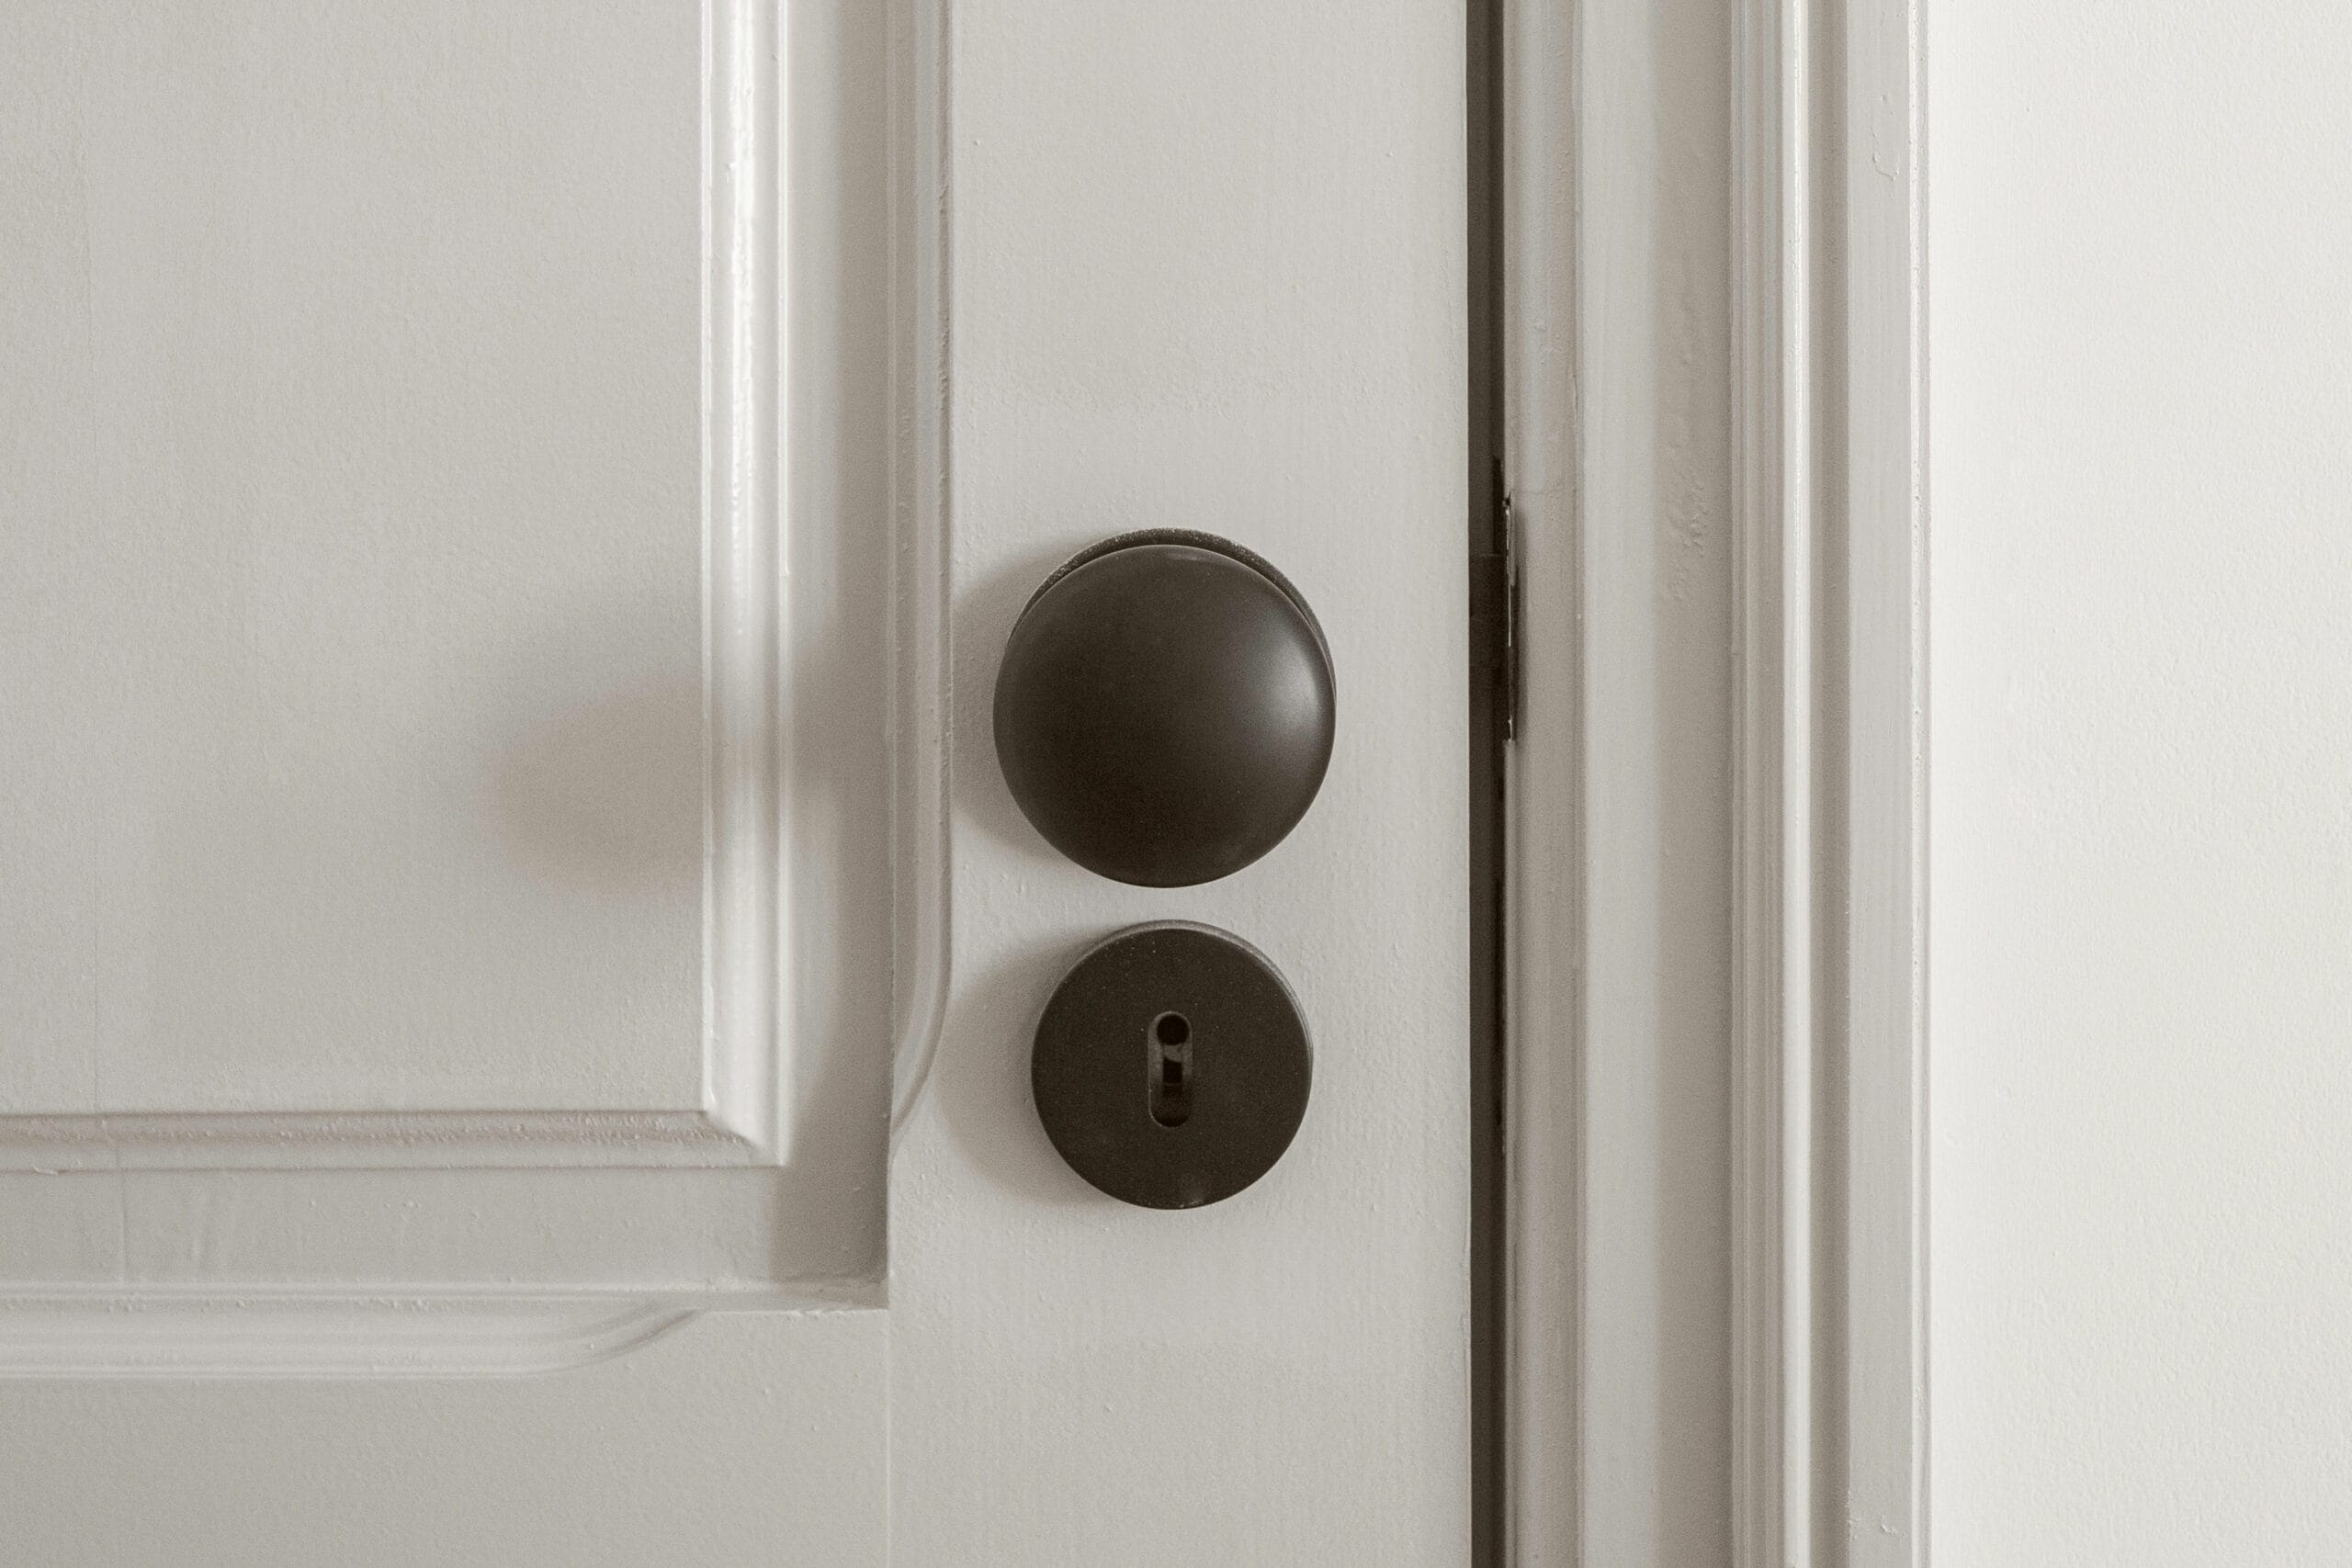 A White Door With Black Handle